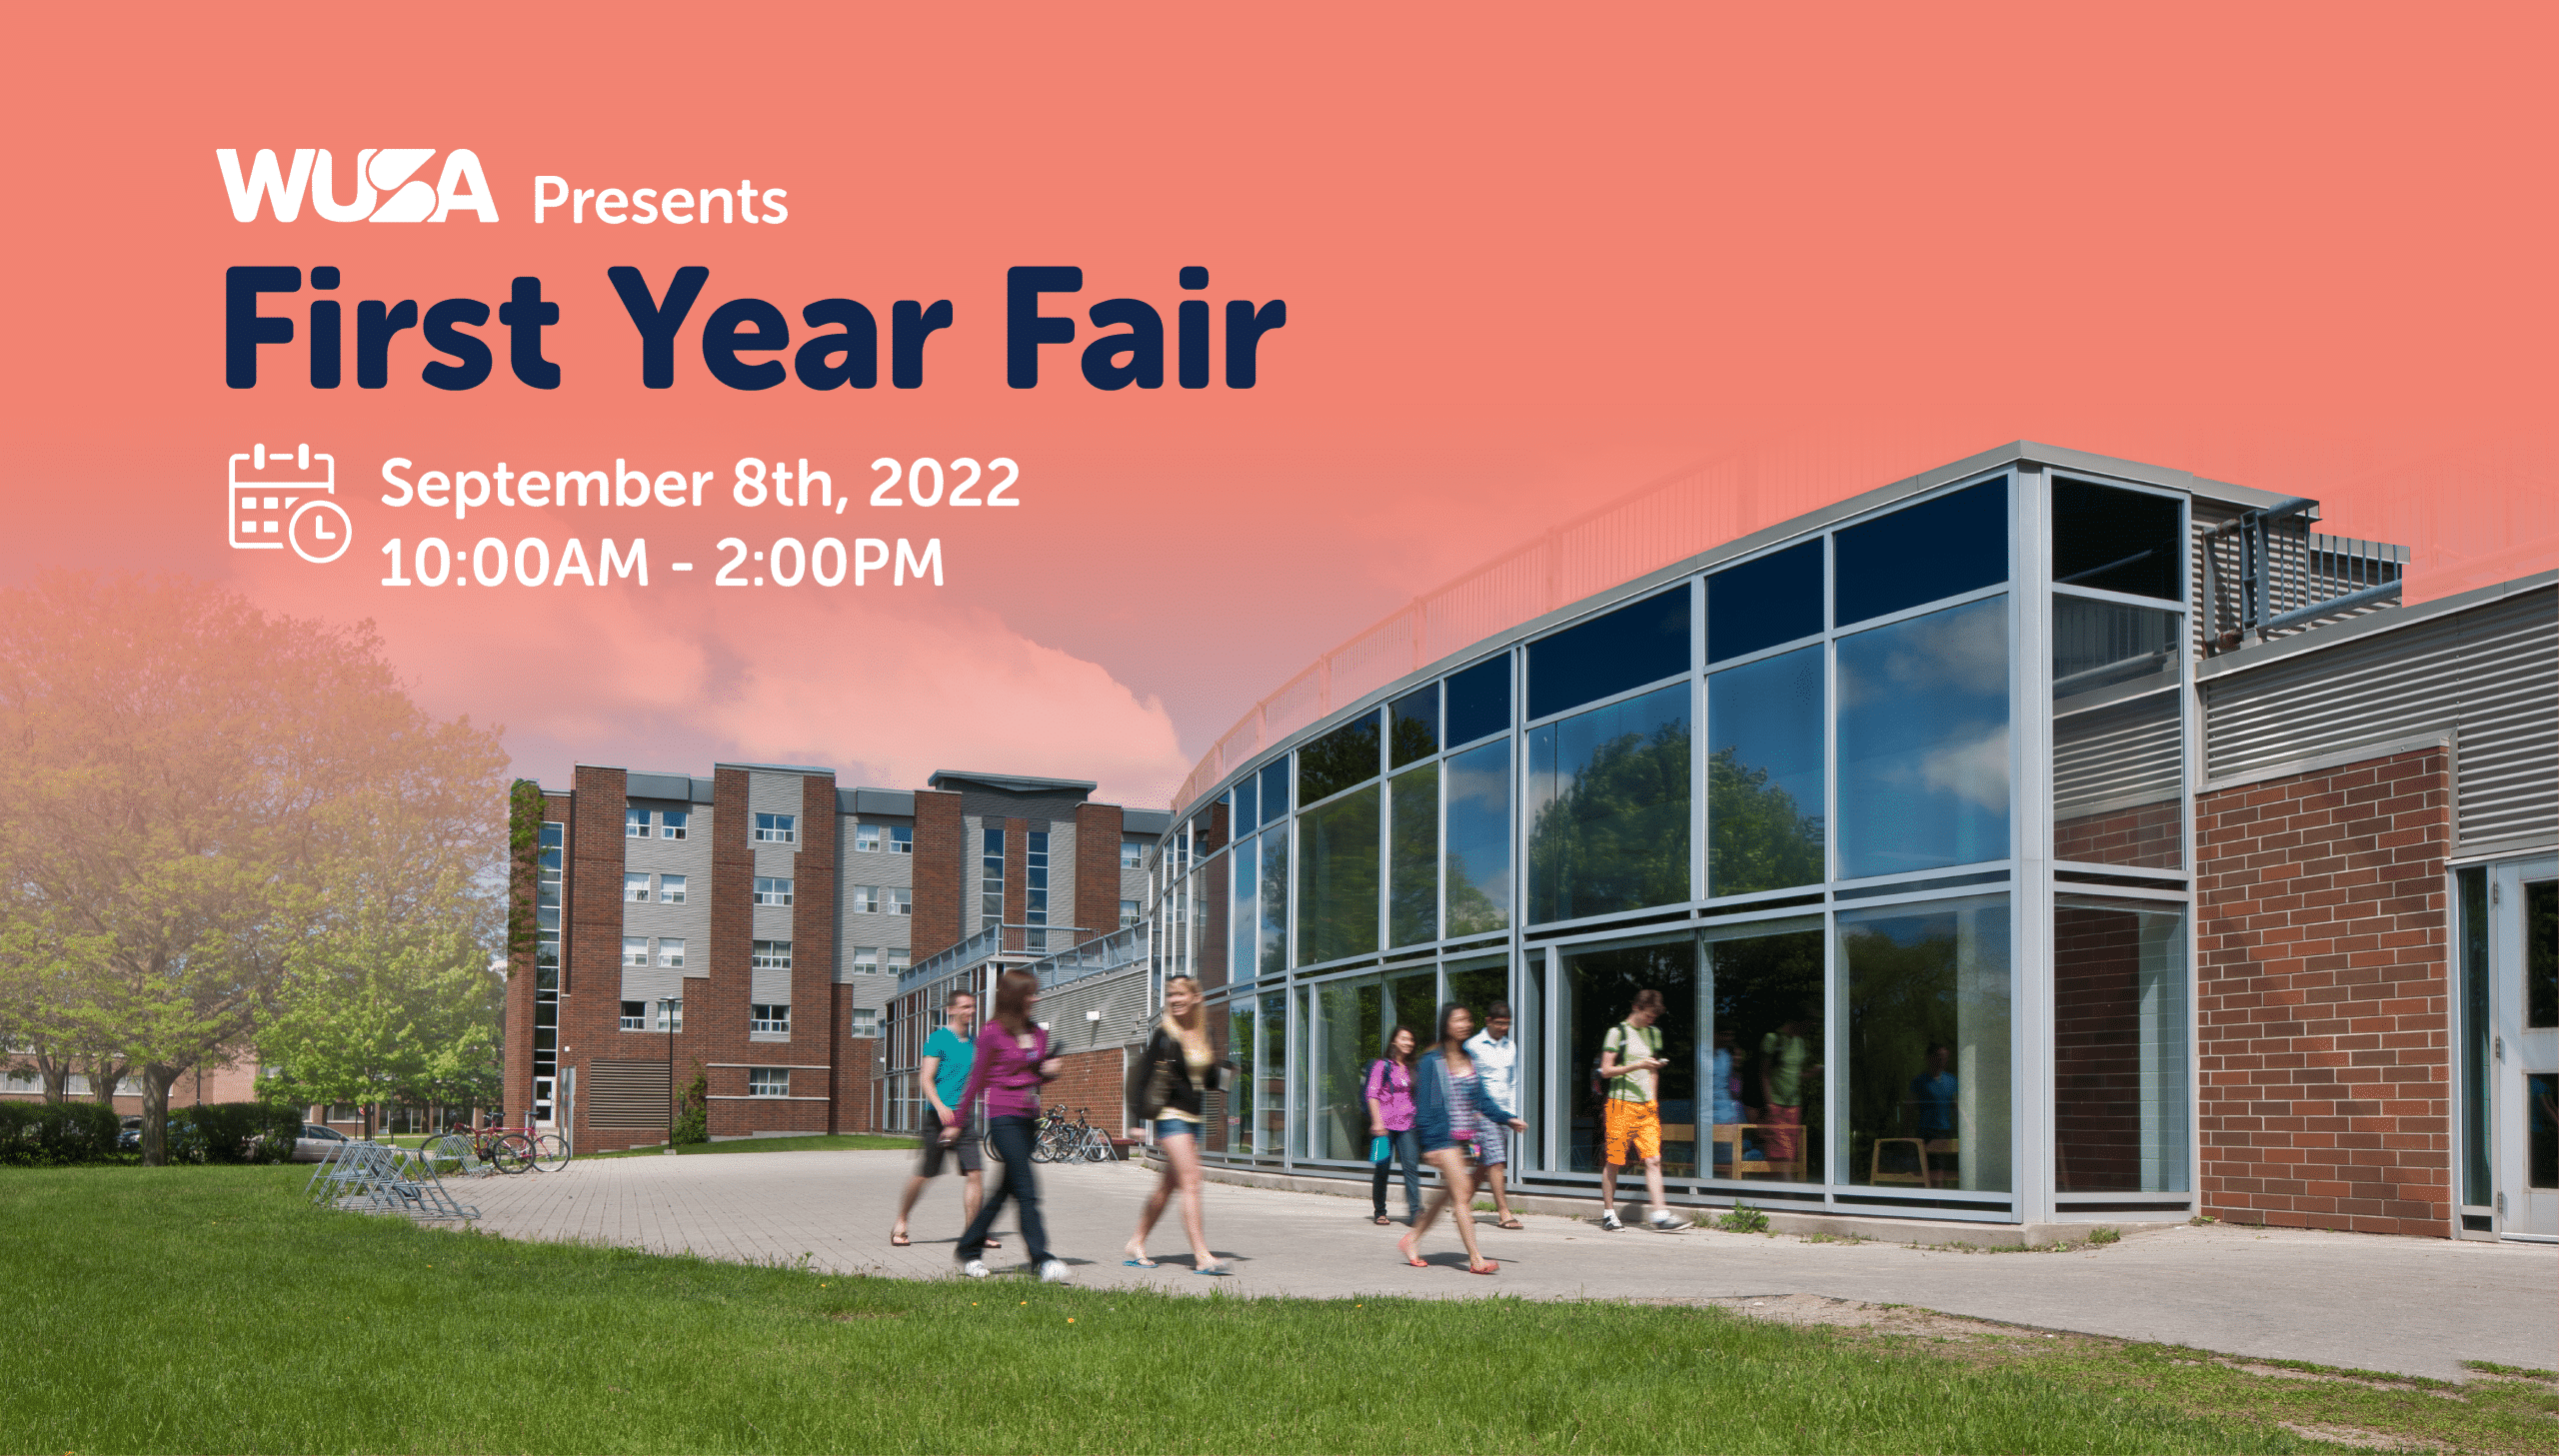 WUSA Presents First Year Fair. September 8th 10:00am to 2:00pm